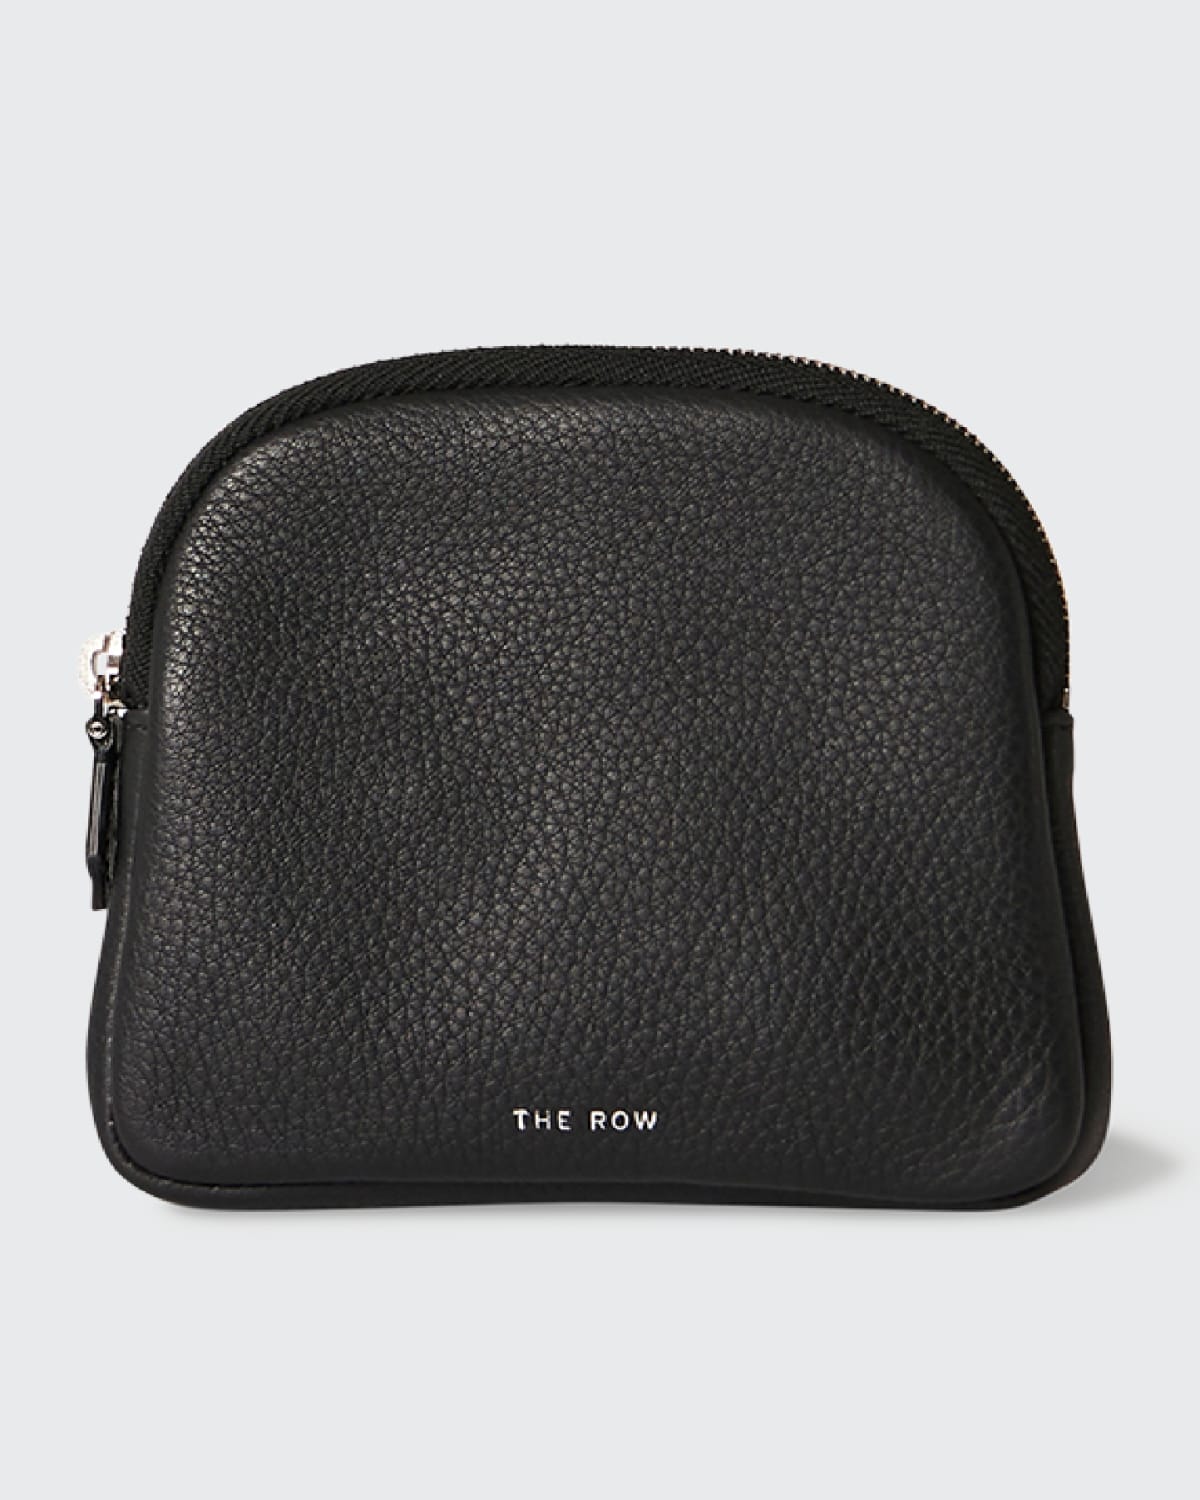 Women's THE ROW Handbags On Sale, Up To 70% Off | ModeSens